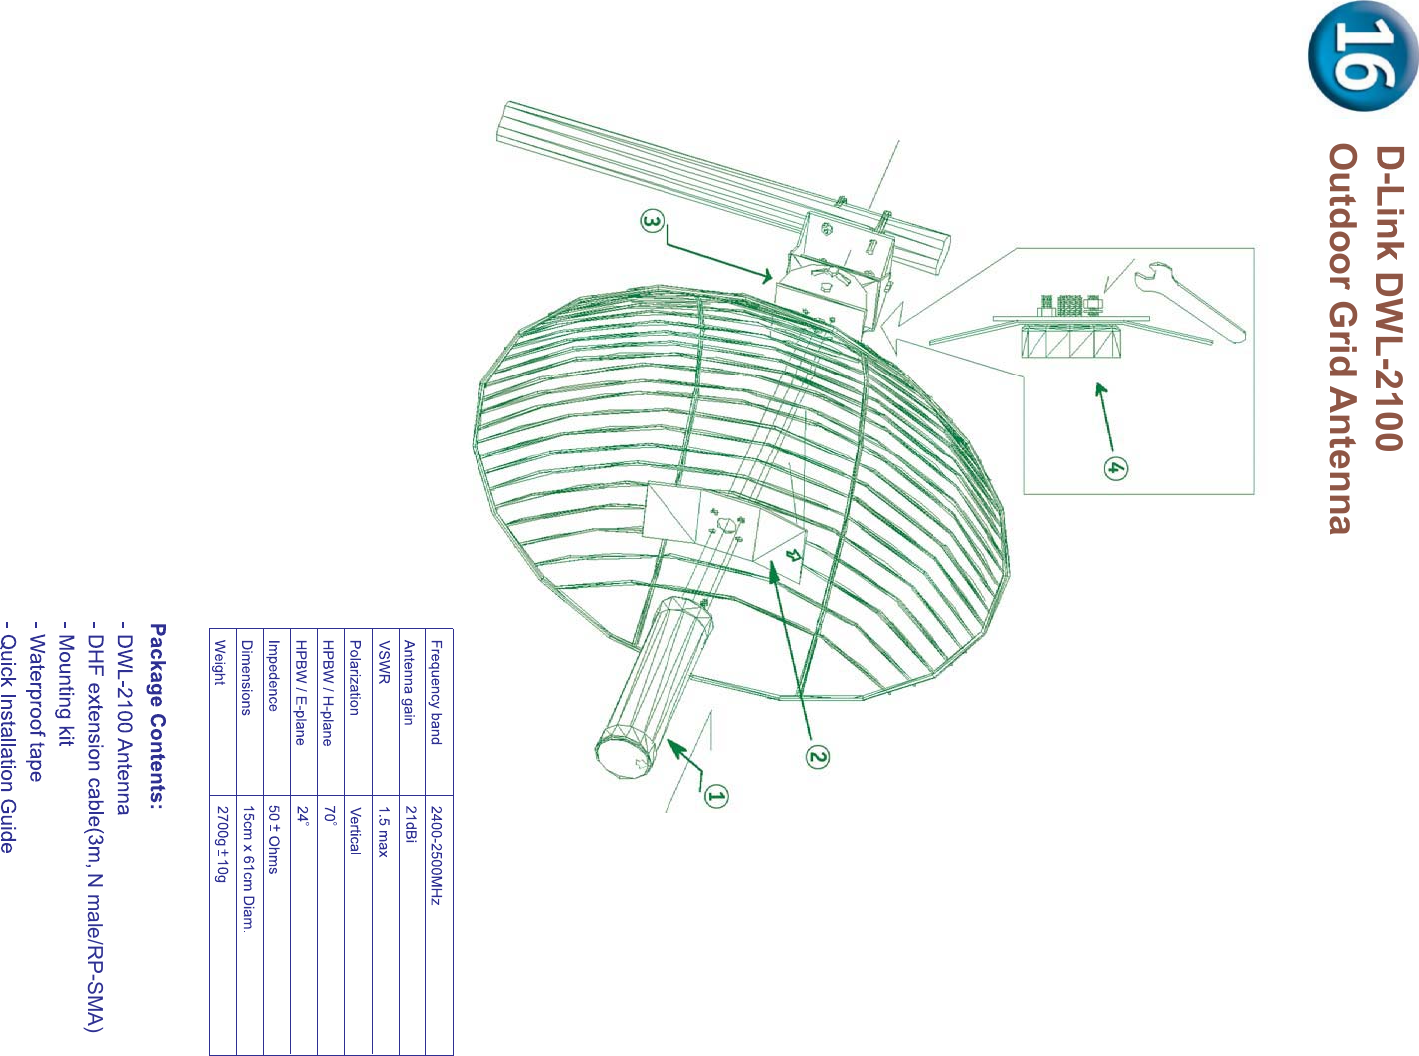 Outdoor Grid AntennaDWL-2100N male/RP-SMA)